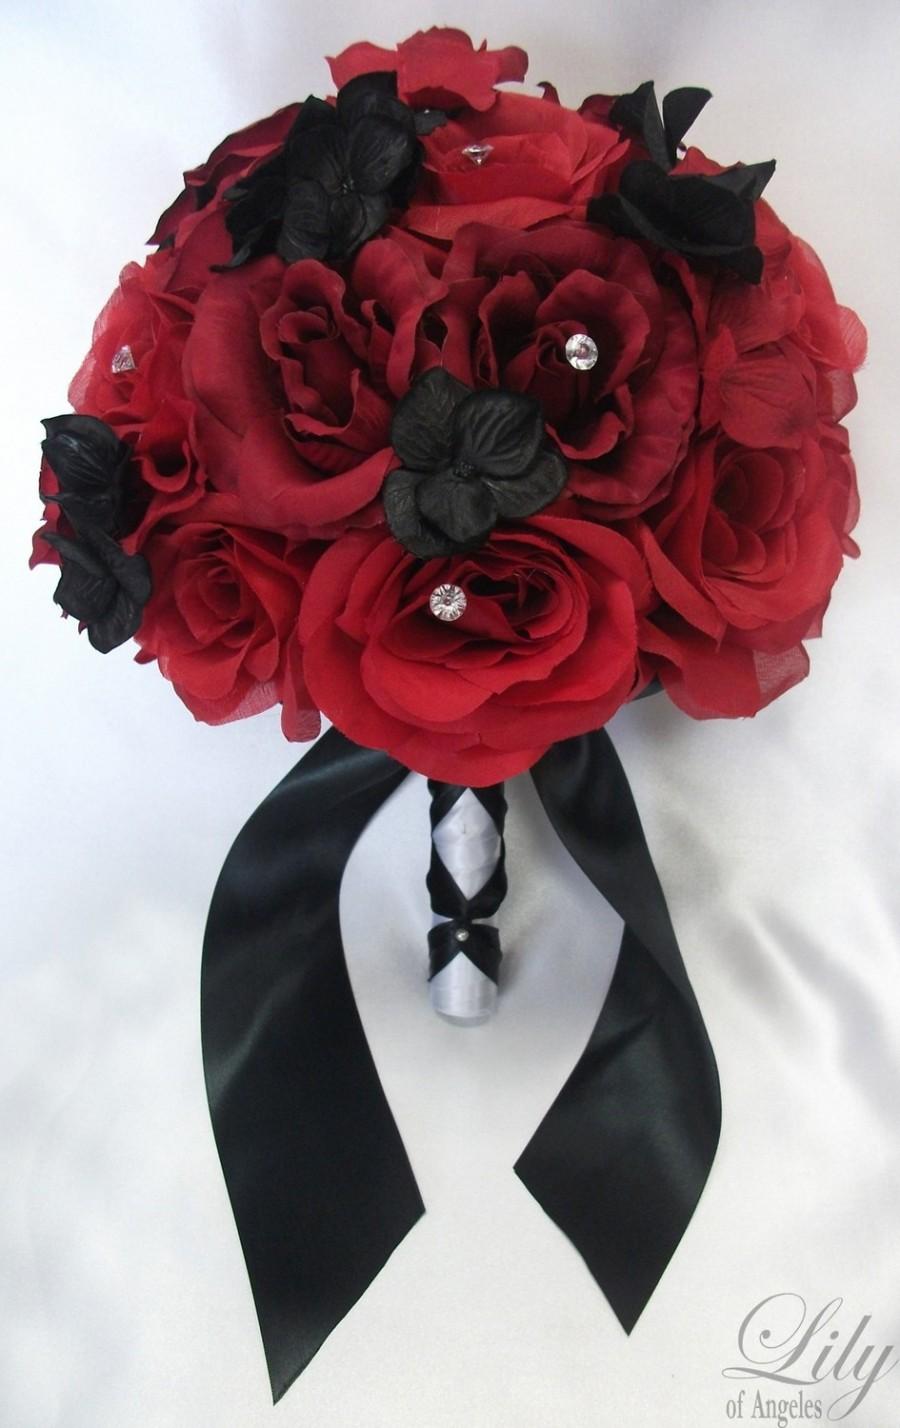 Wedding - 17 Piece Package Wedding Bridal Bride Maid Of Honor Bridesmaid Bouquet Boutonniere Corsage Silk Flower RED BLACK "Lily Of Angeles" REBK03